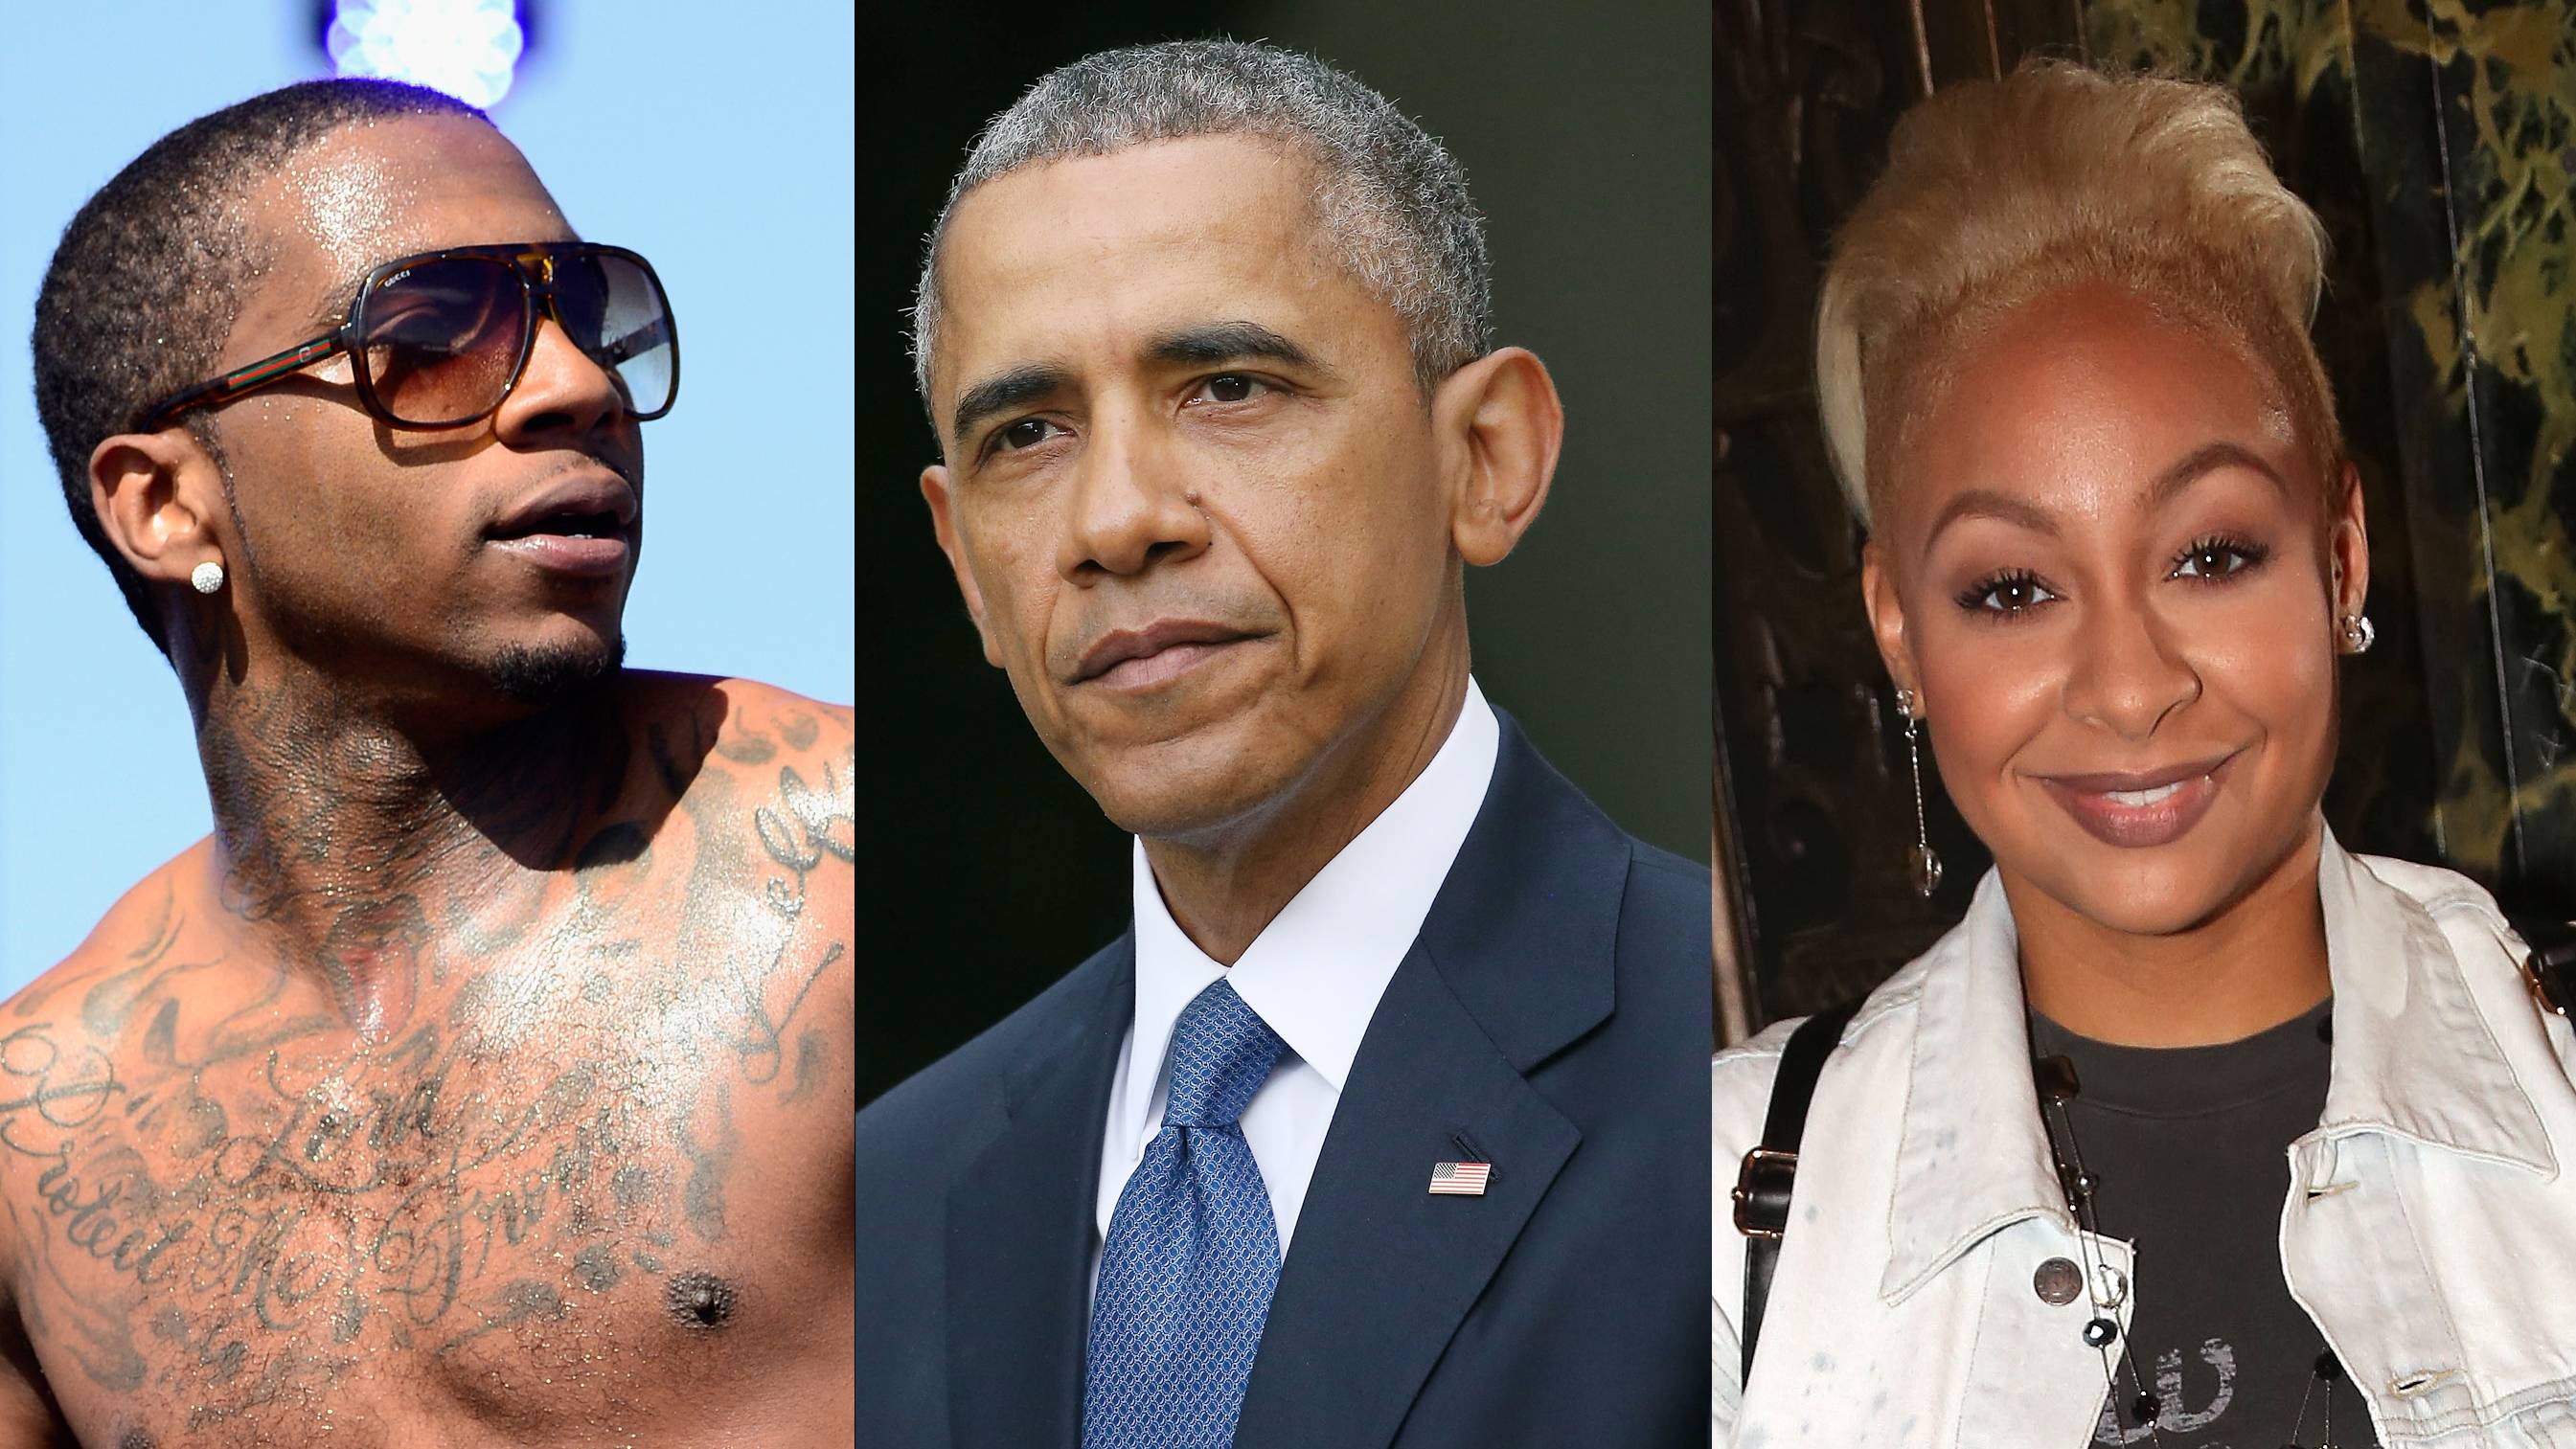 #LoveWins - President Obama, Lil B and Raven Symone are just a few folks who have responded to the Supreme Court’s ruling that same-sex marriage has been extended to all 50 states. Take a look at several other responses on Twitter.  (Photos from Left: Frazer Harrison/Getty Images for Coachella, Mark Wilson/Getty Images, Bruce Glikas/FilmMagic)